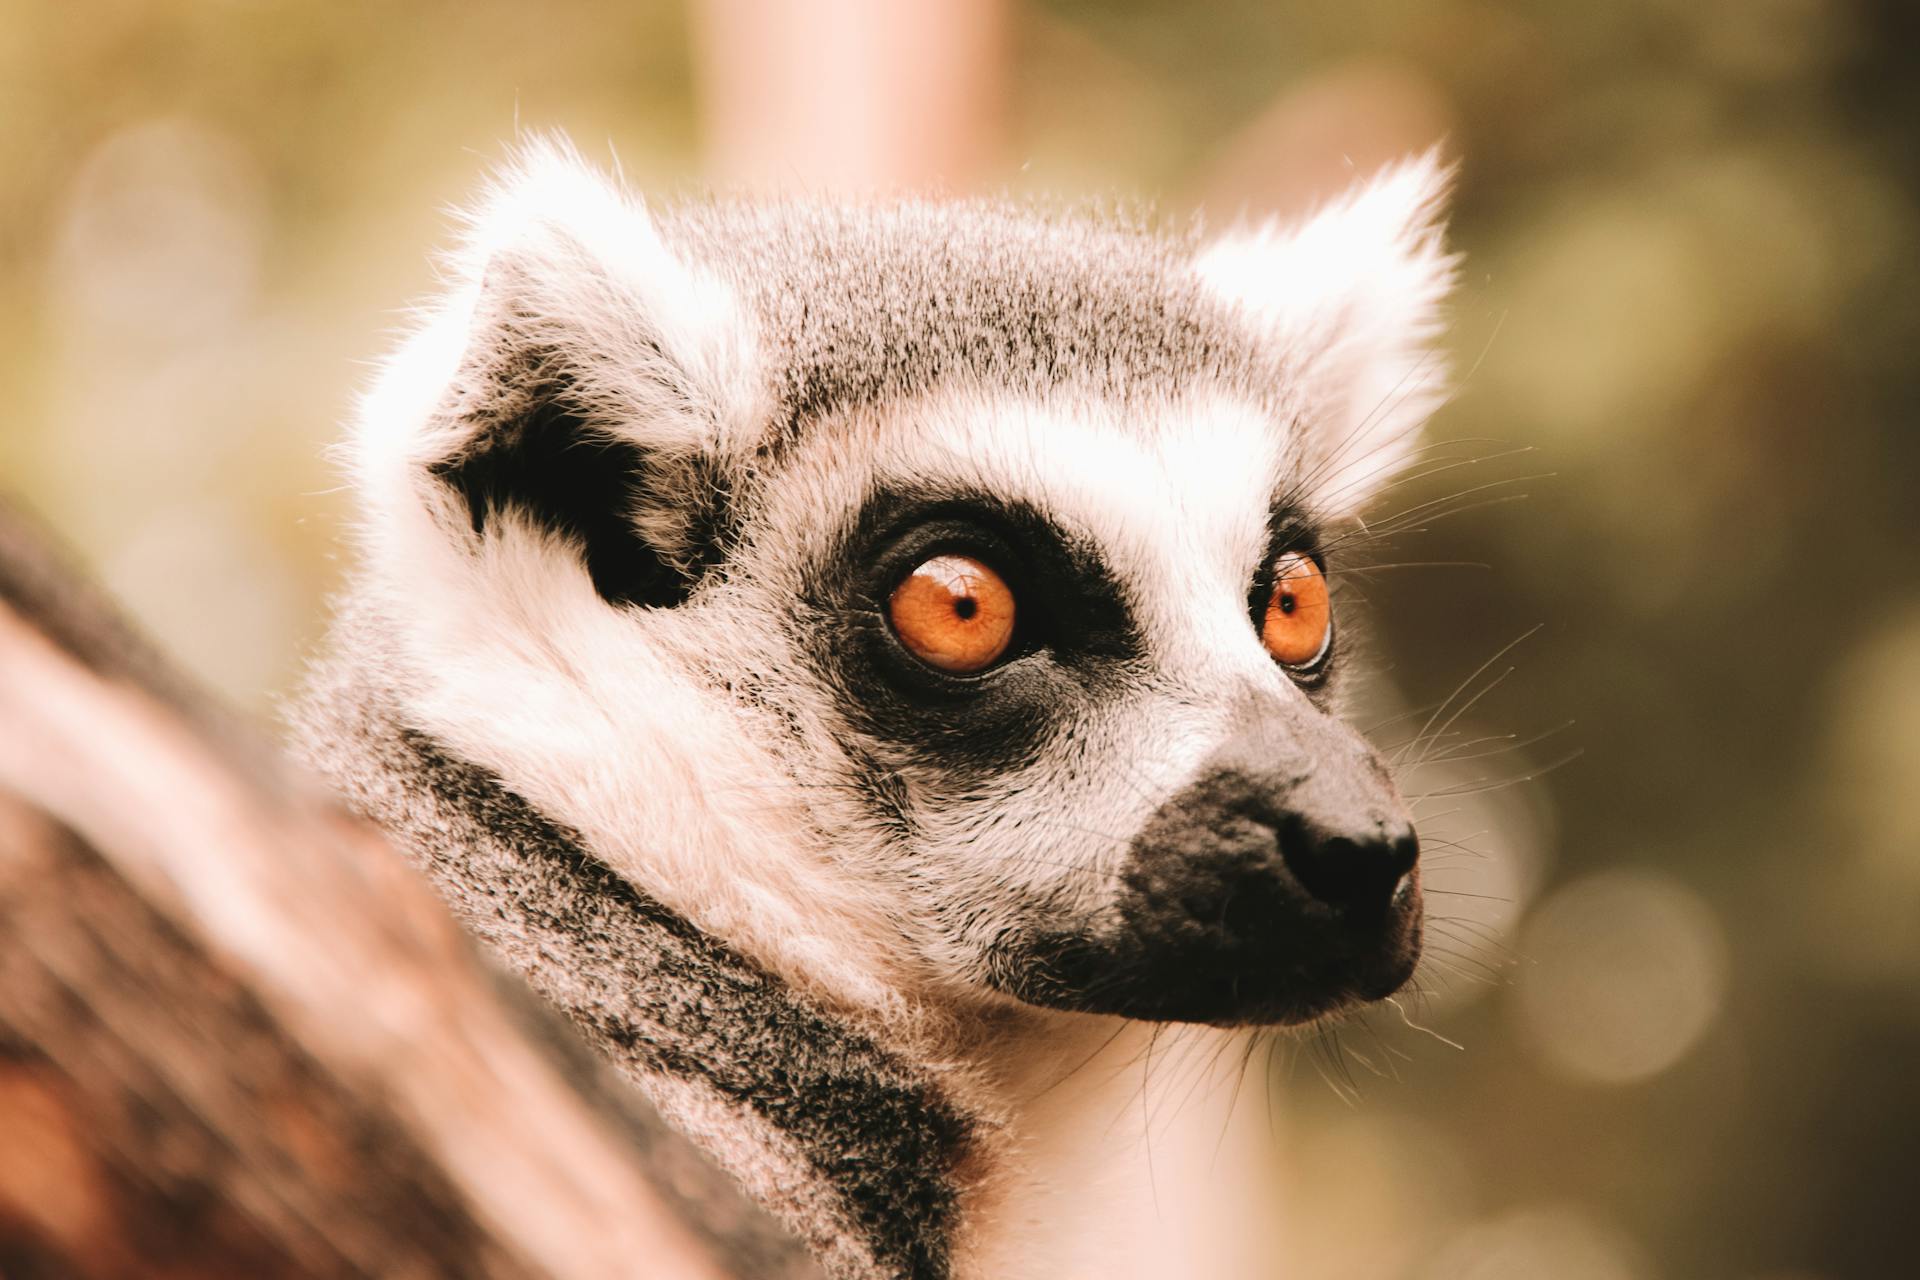 Muzzle of grey ring tailed lemur looking away on blurred background in daytime